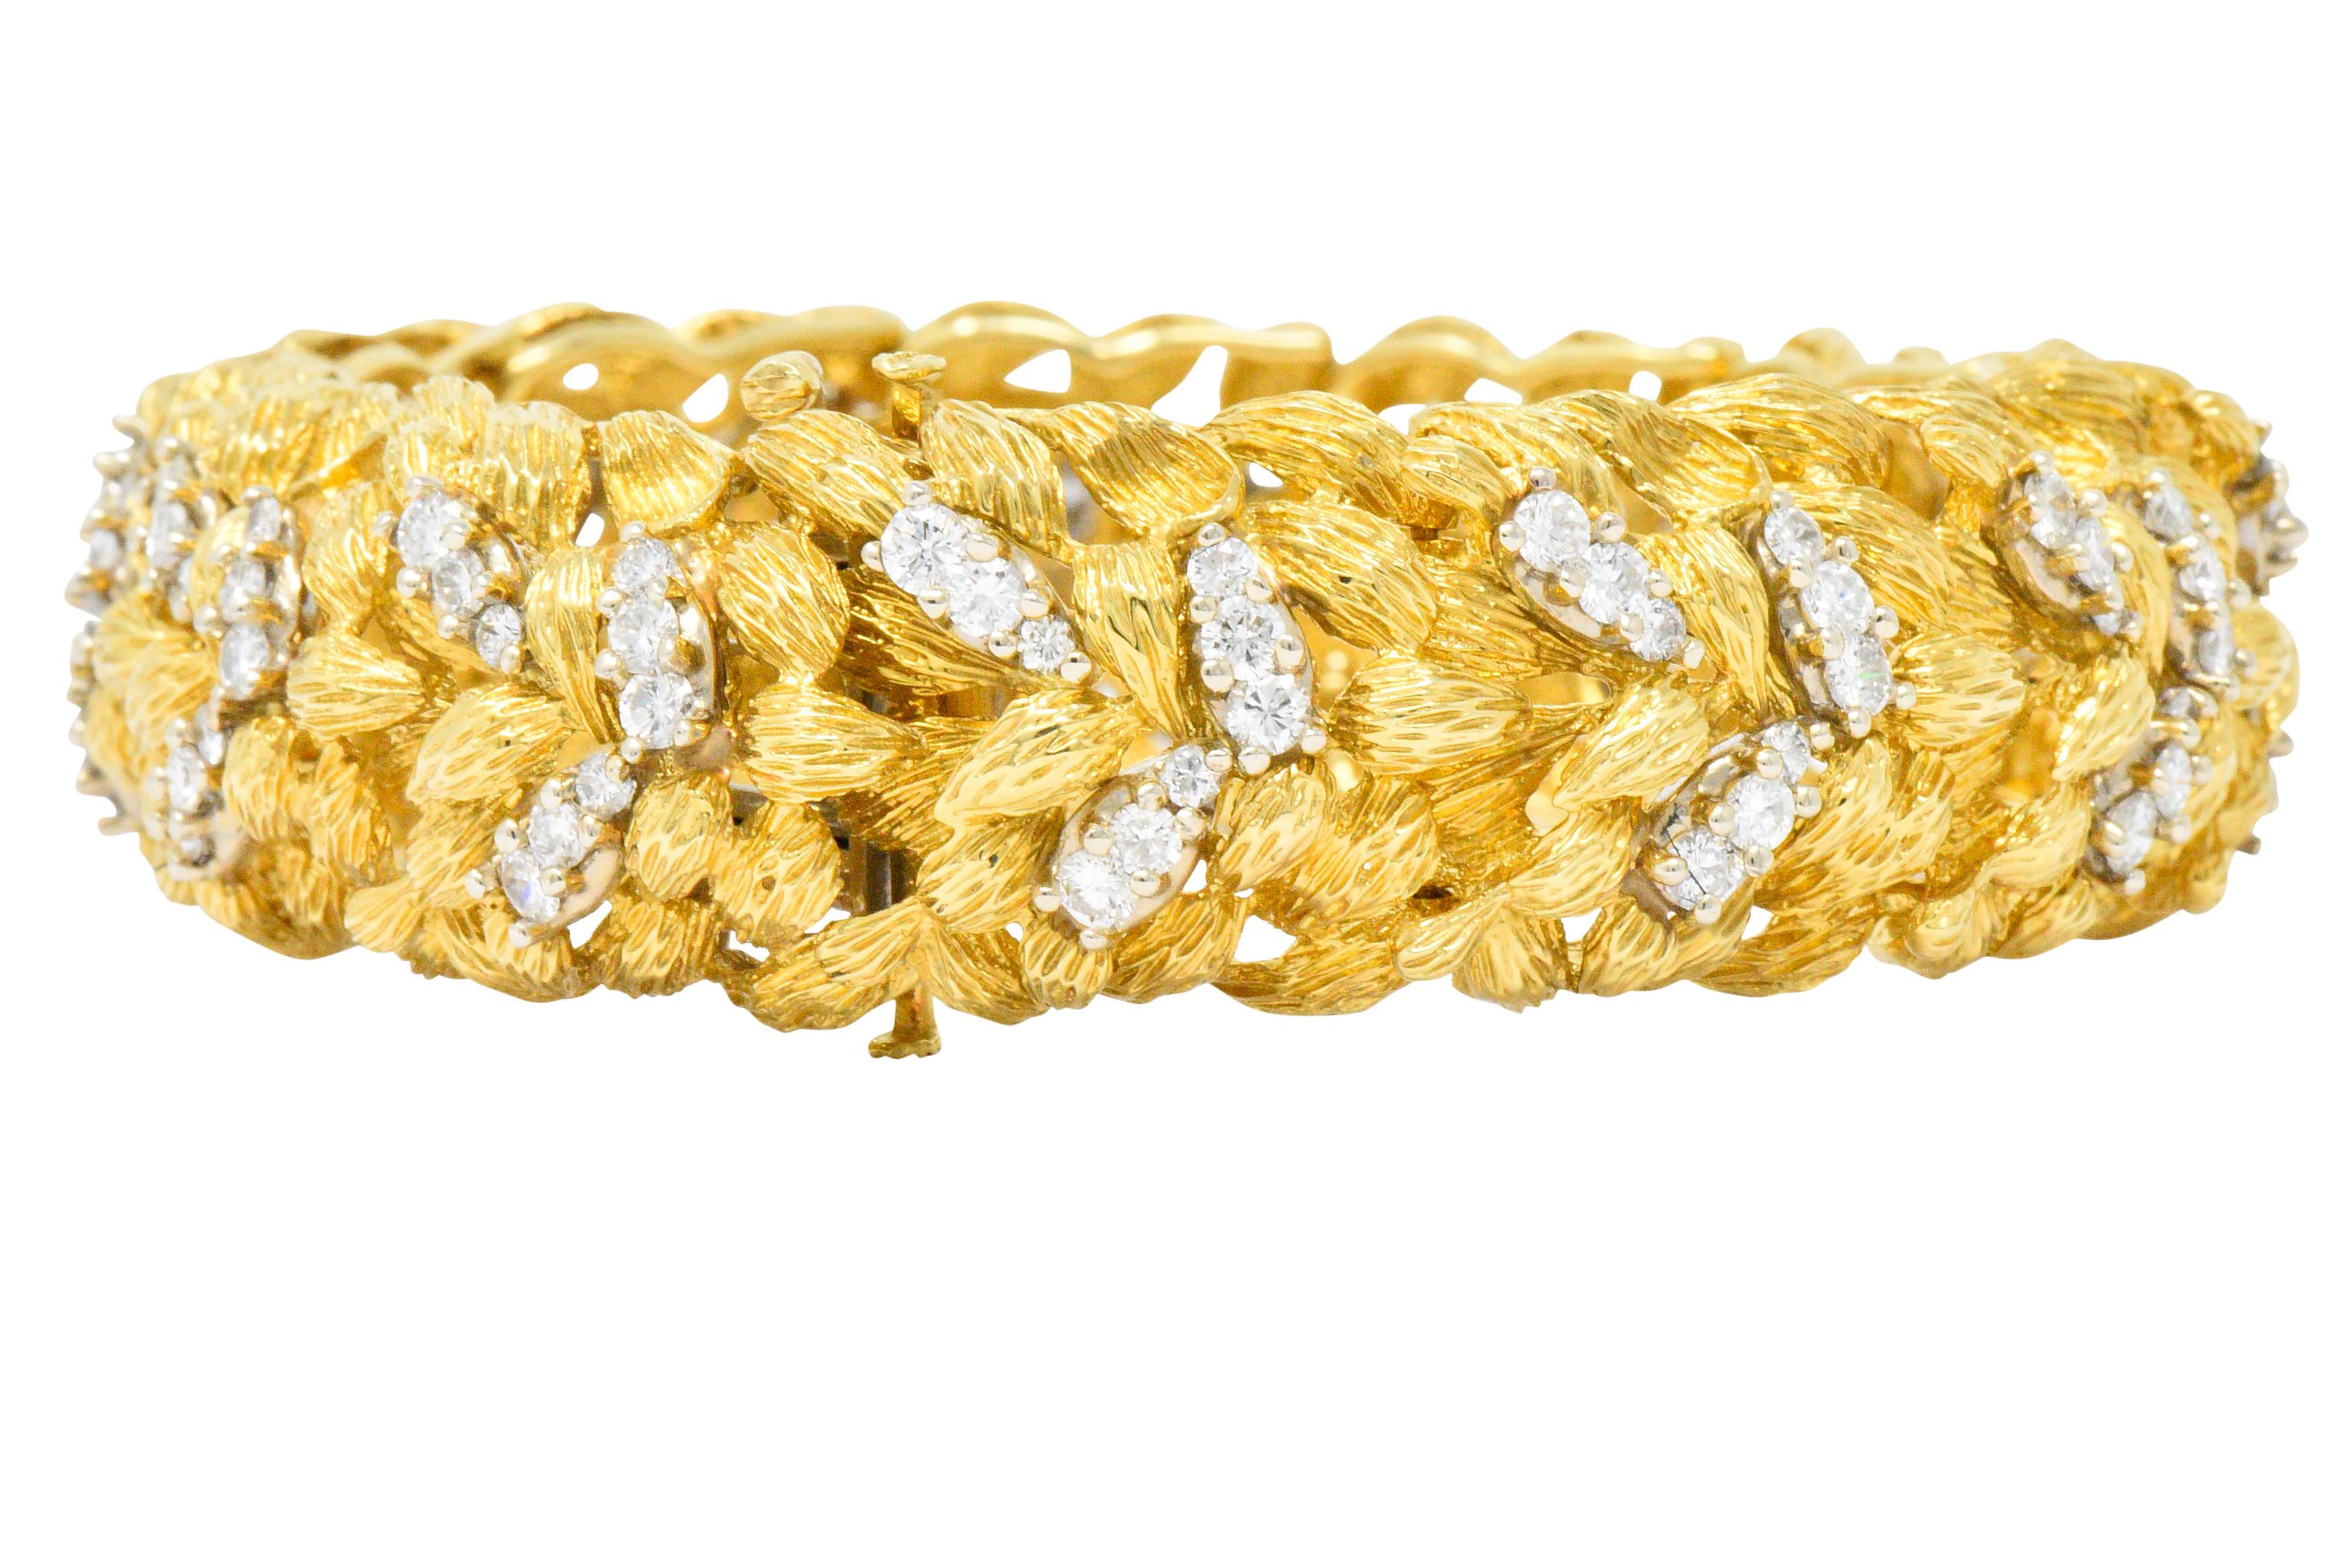 Designed as flowing and over-lapping abstract textured gold leaves

Accented with round brilliant cut diamonds, weighing approximately 6.24 carats total, F/G color and VS to SI1 clarity

With a concealed clasp and fold-over safety, and